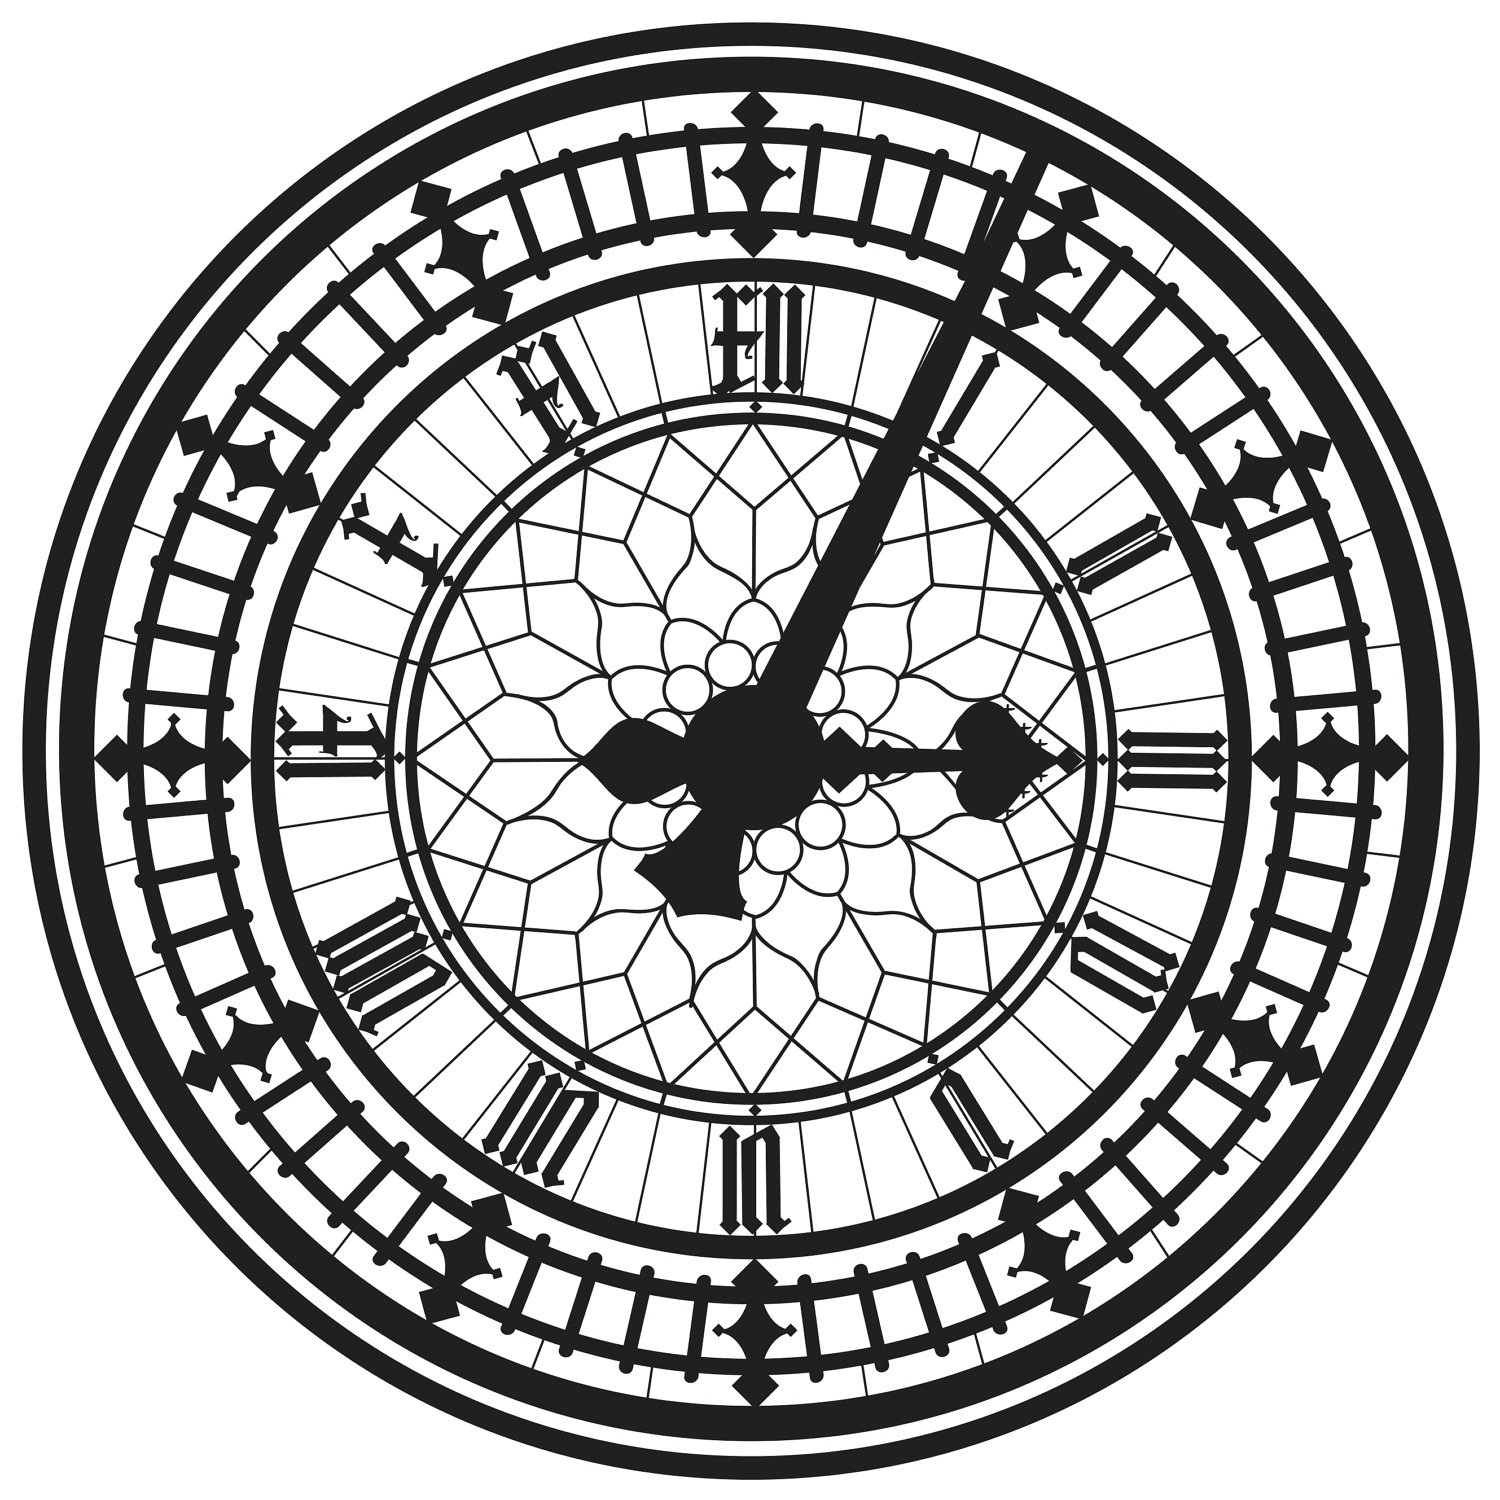 Old Clock Drawing at GetDrawings.com | Free for personal use Old ...